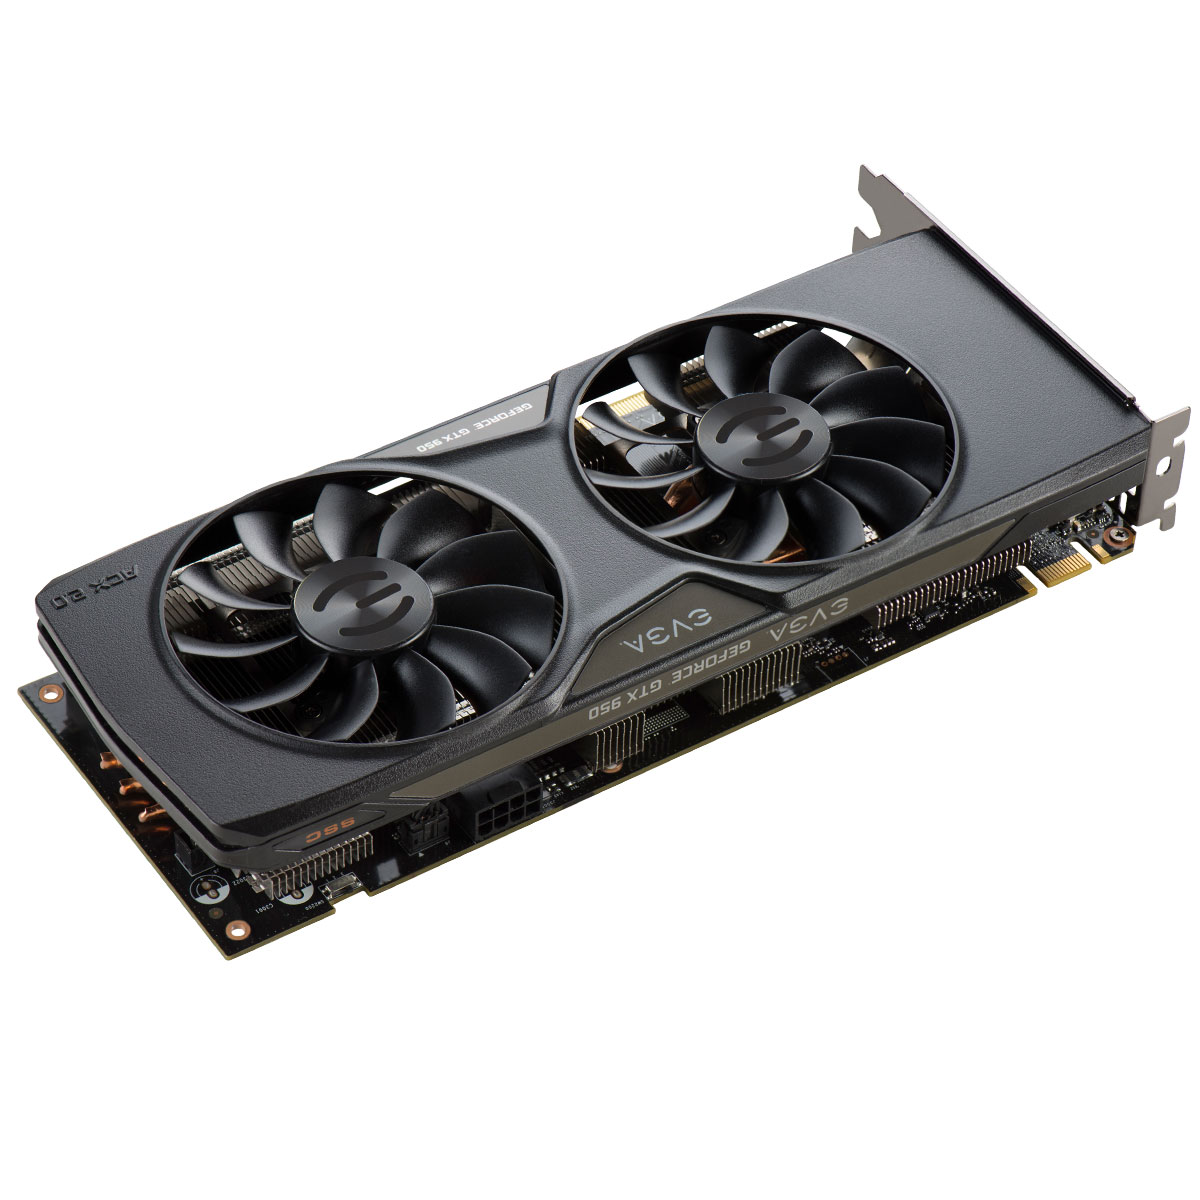 02G-P4-2957-KR | EVGA GeForce GTX 950 2GB SSC Gaming, Silent Cooling Graphics Card